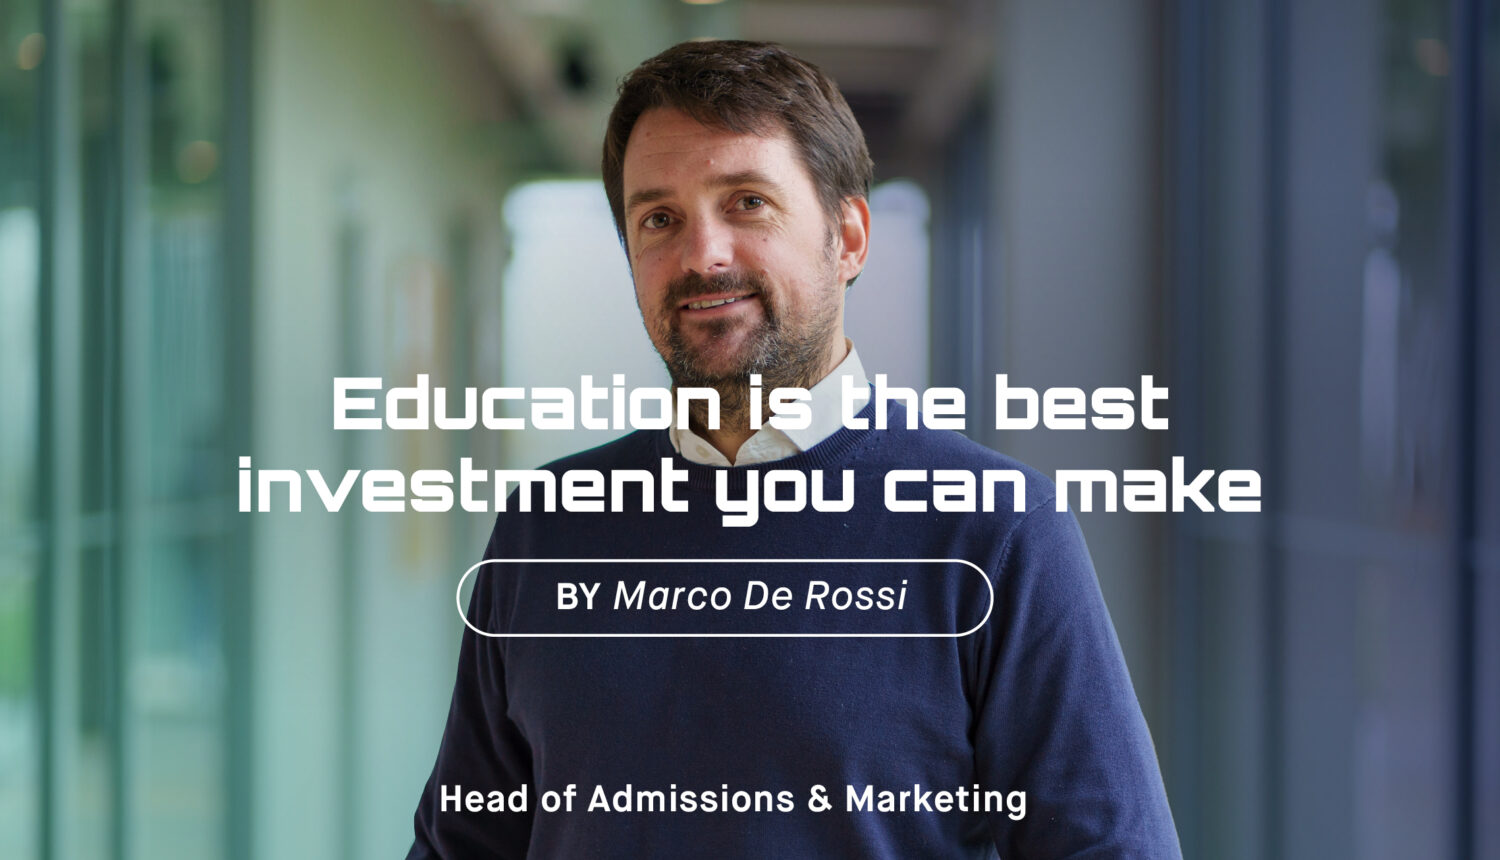 Education is the best investment you can make